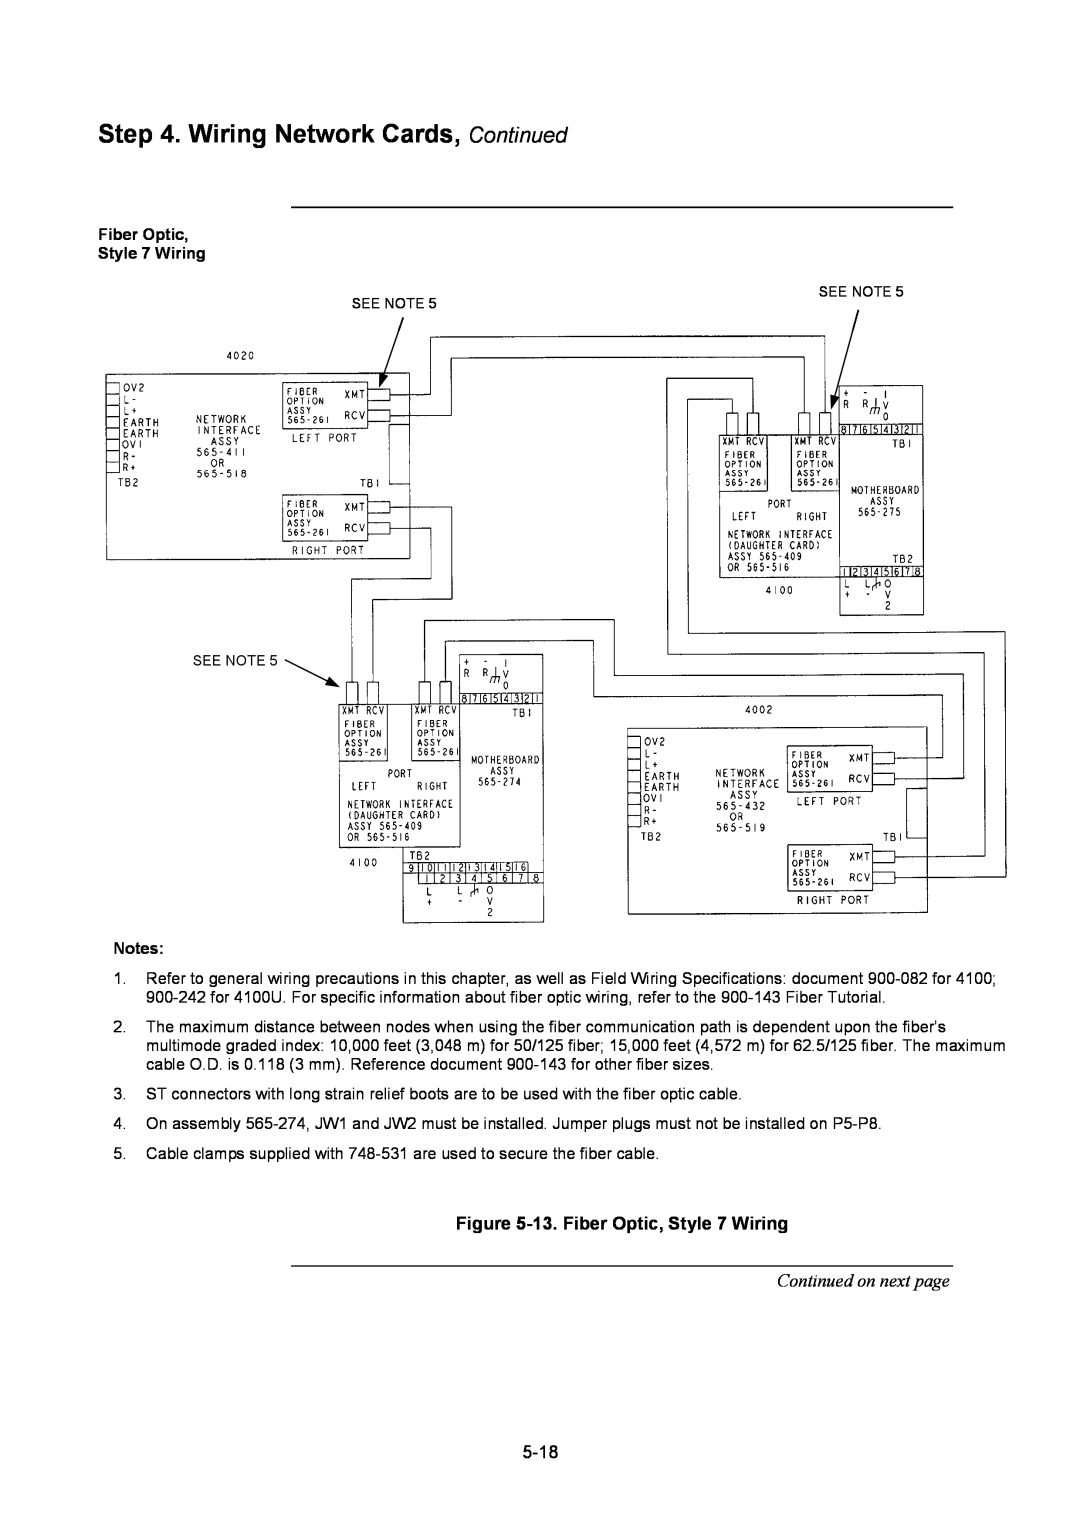 Tyco 4100U Wiring Network Cards, Continued, 13.Fiber Optic, Style 7 Wiring, Continued on next page, Notes 